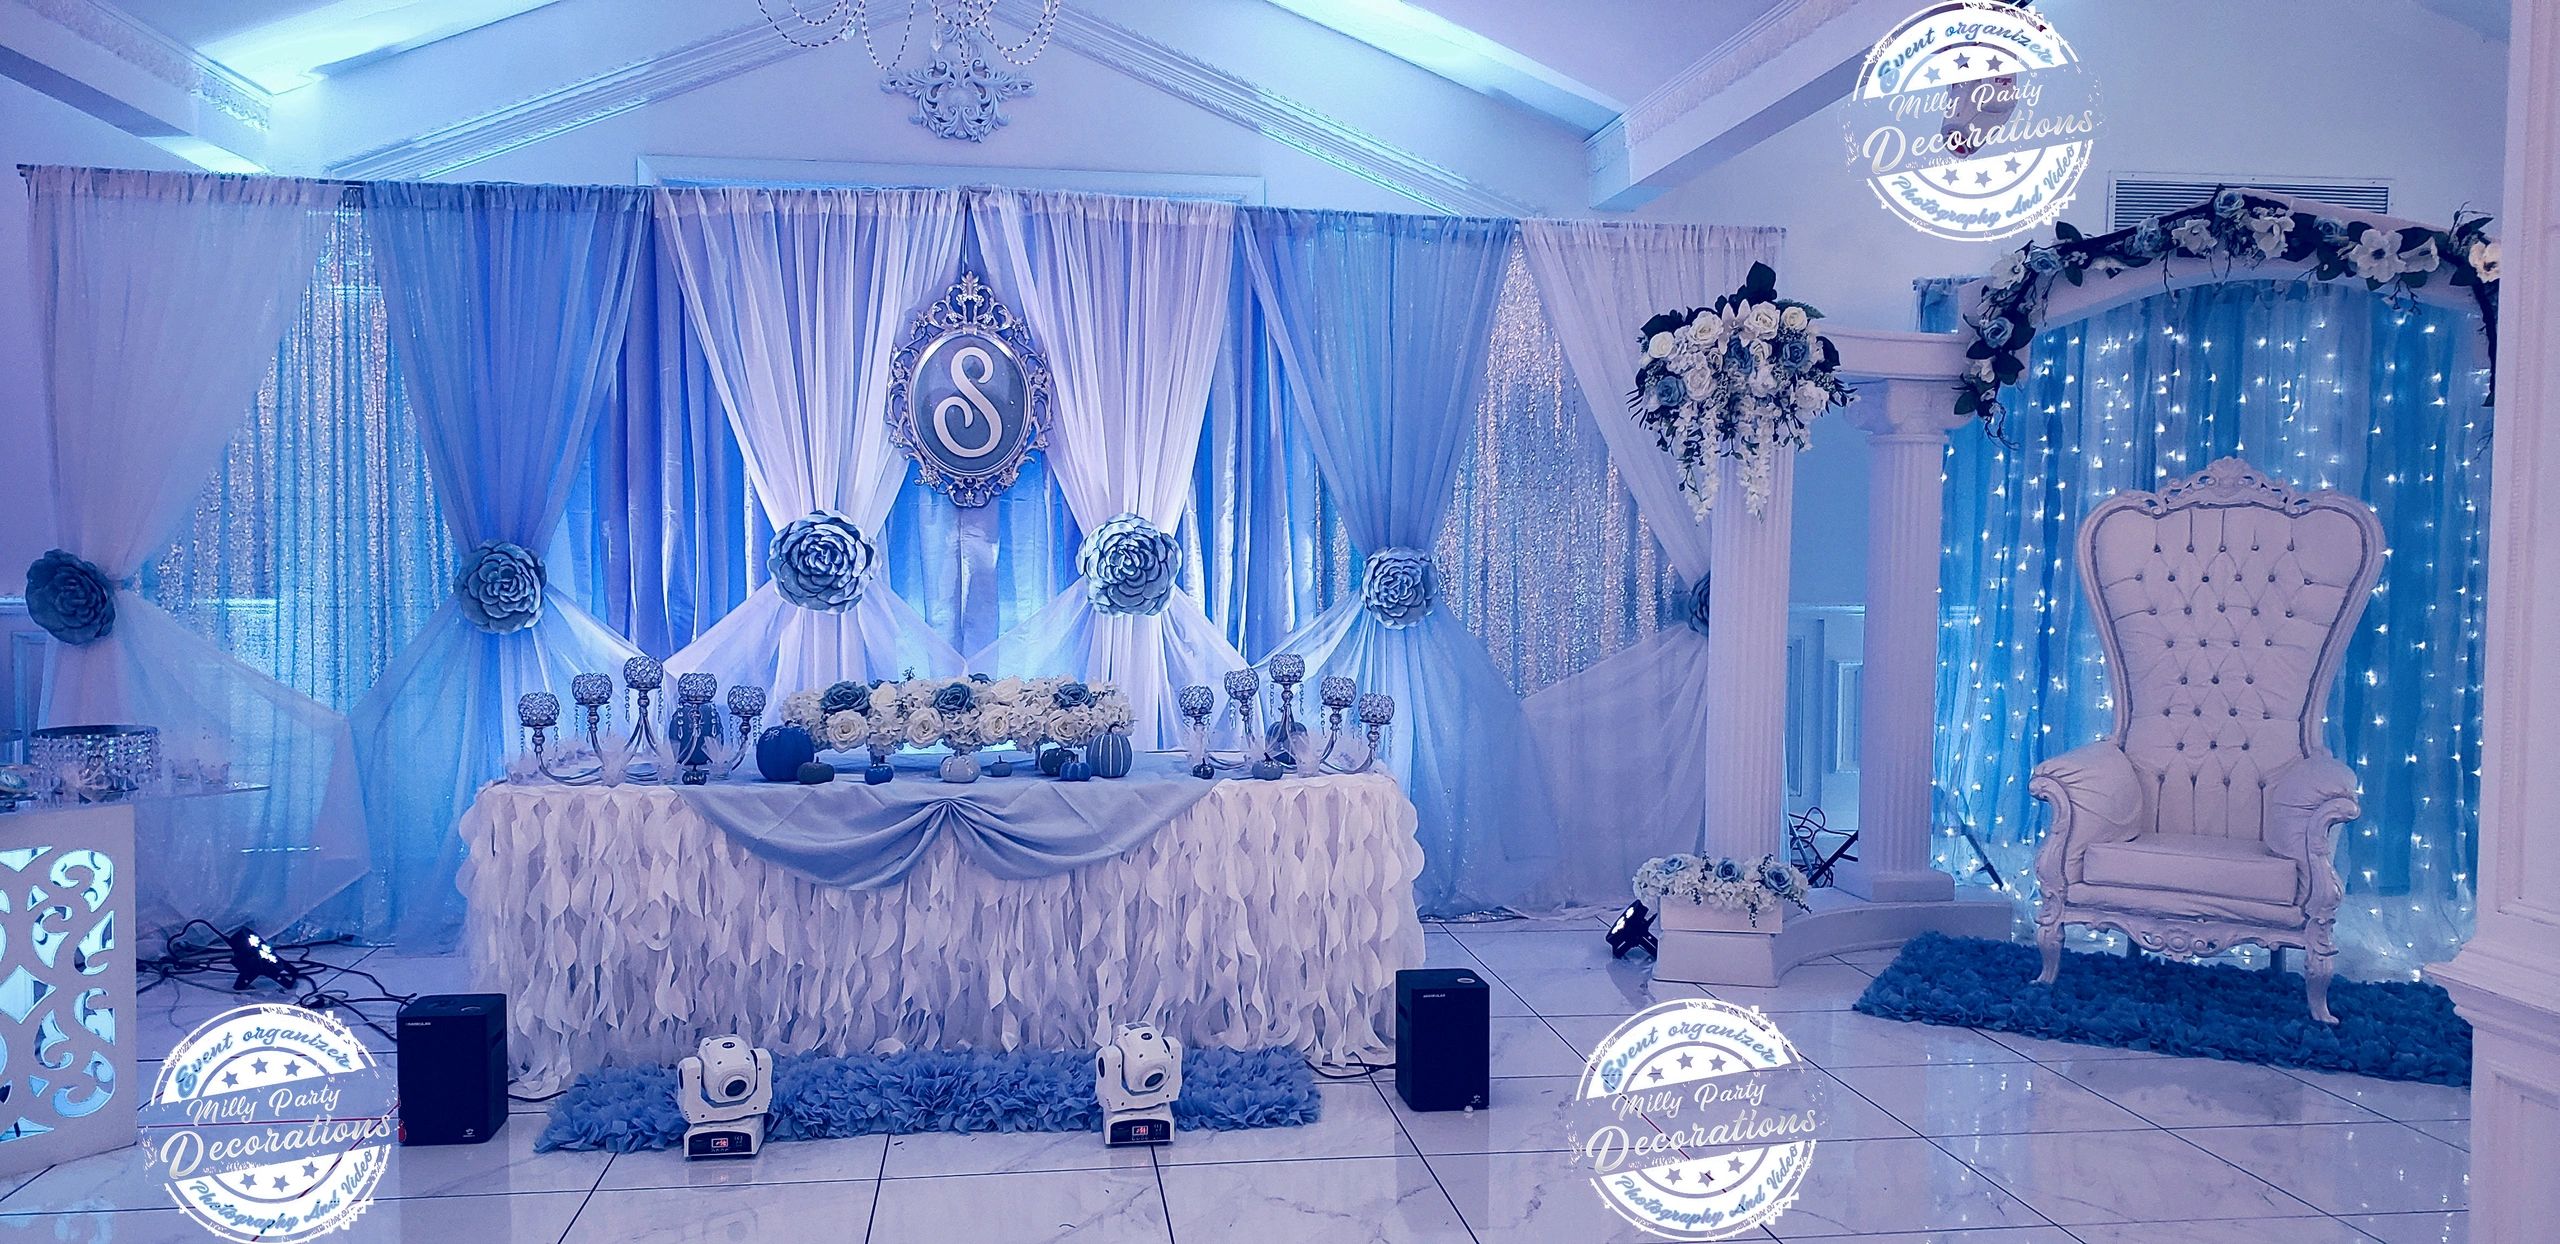 Sweet 16 - Decorations (Baby Blue)(White)(Silver)